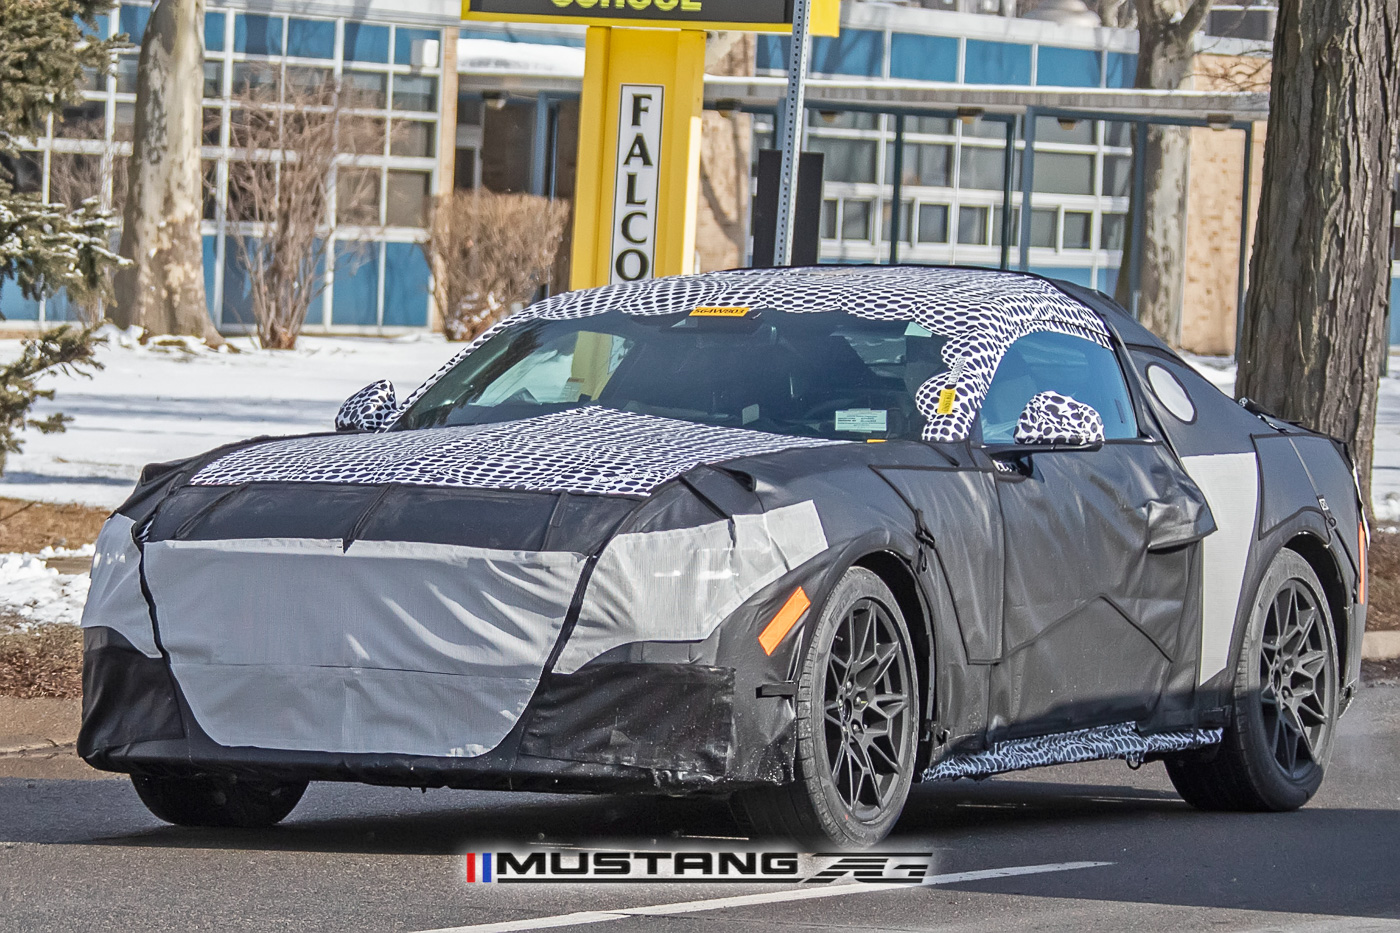 S650 Mustang Spied: New Mustang Prototype w/ Mach 1-Style Wheels, Upgraded Dual Caliper Rear Brakes 📸 S650 Prototype 26